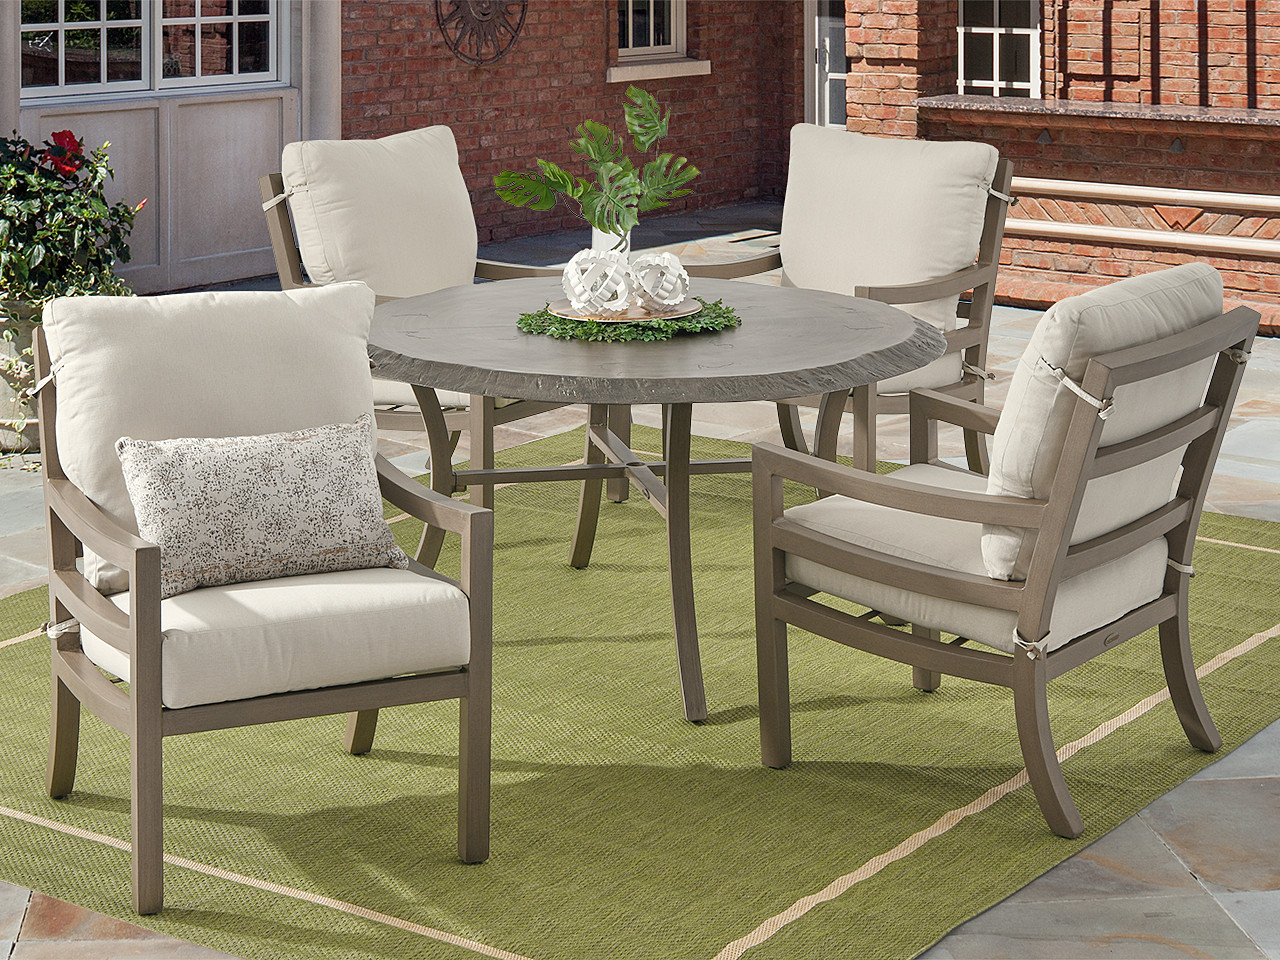 Roma Weathered Wood Aluminum and Sand Linen Cushion 5 Pc. Dining Set with 54 in. D Table